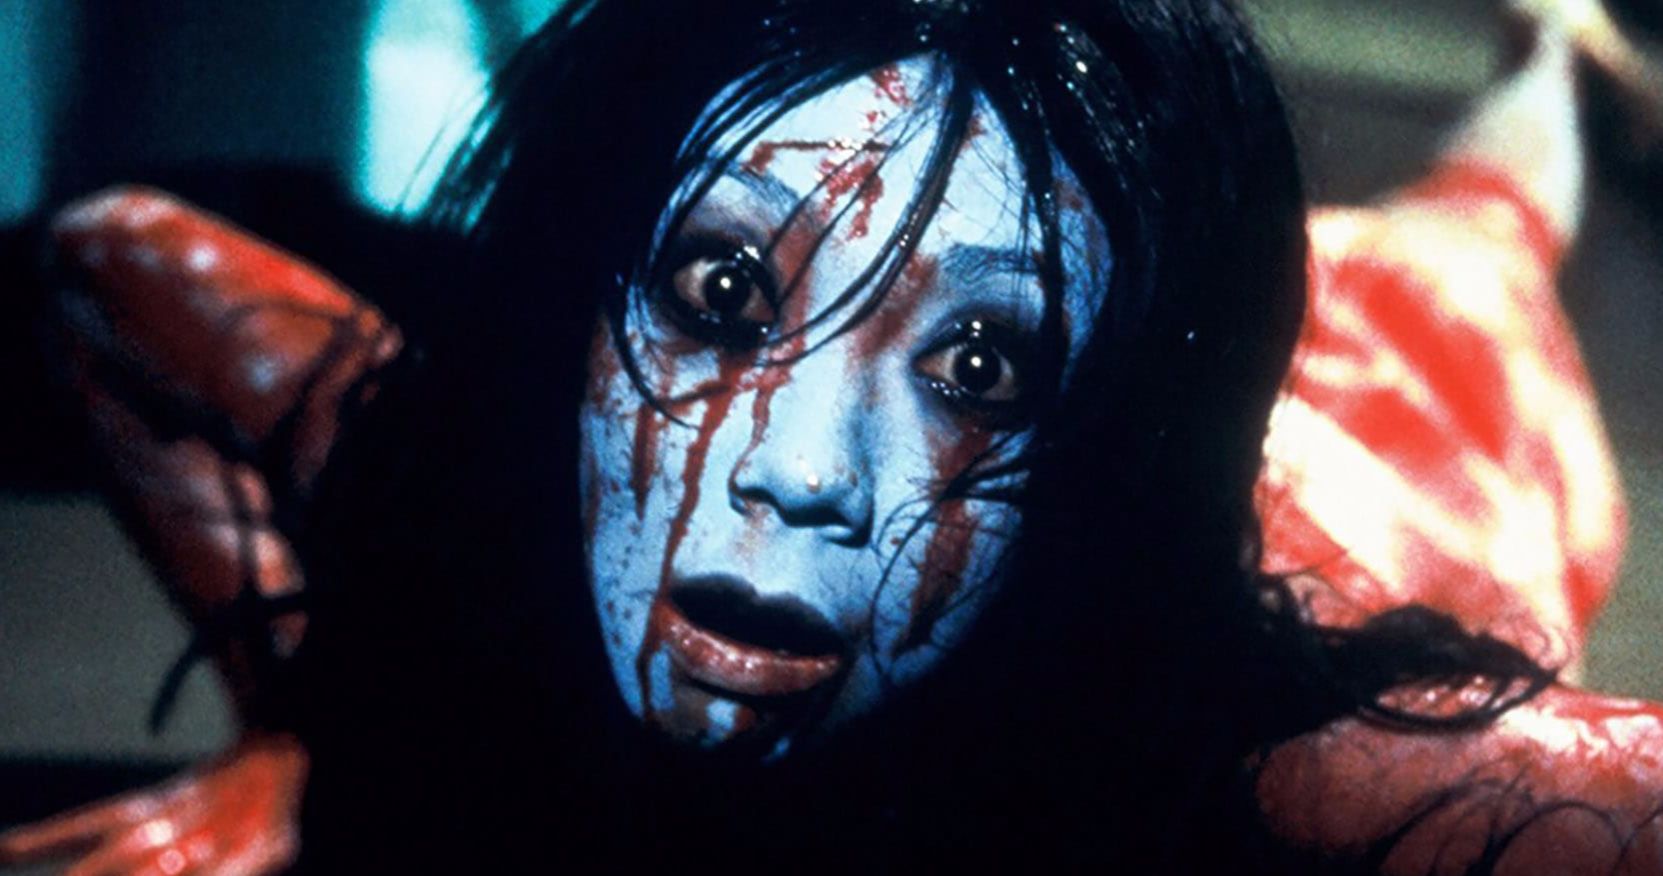 Ju-On: The Grudge TV Show Is Coming to Netflix in 2020